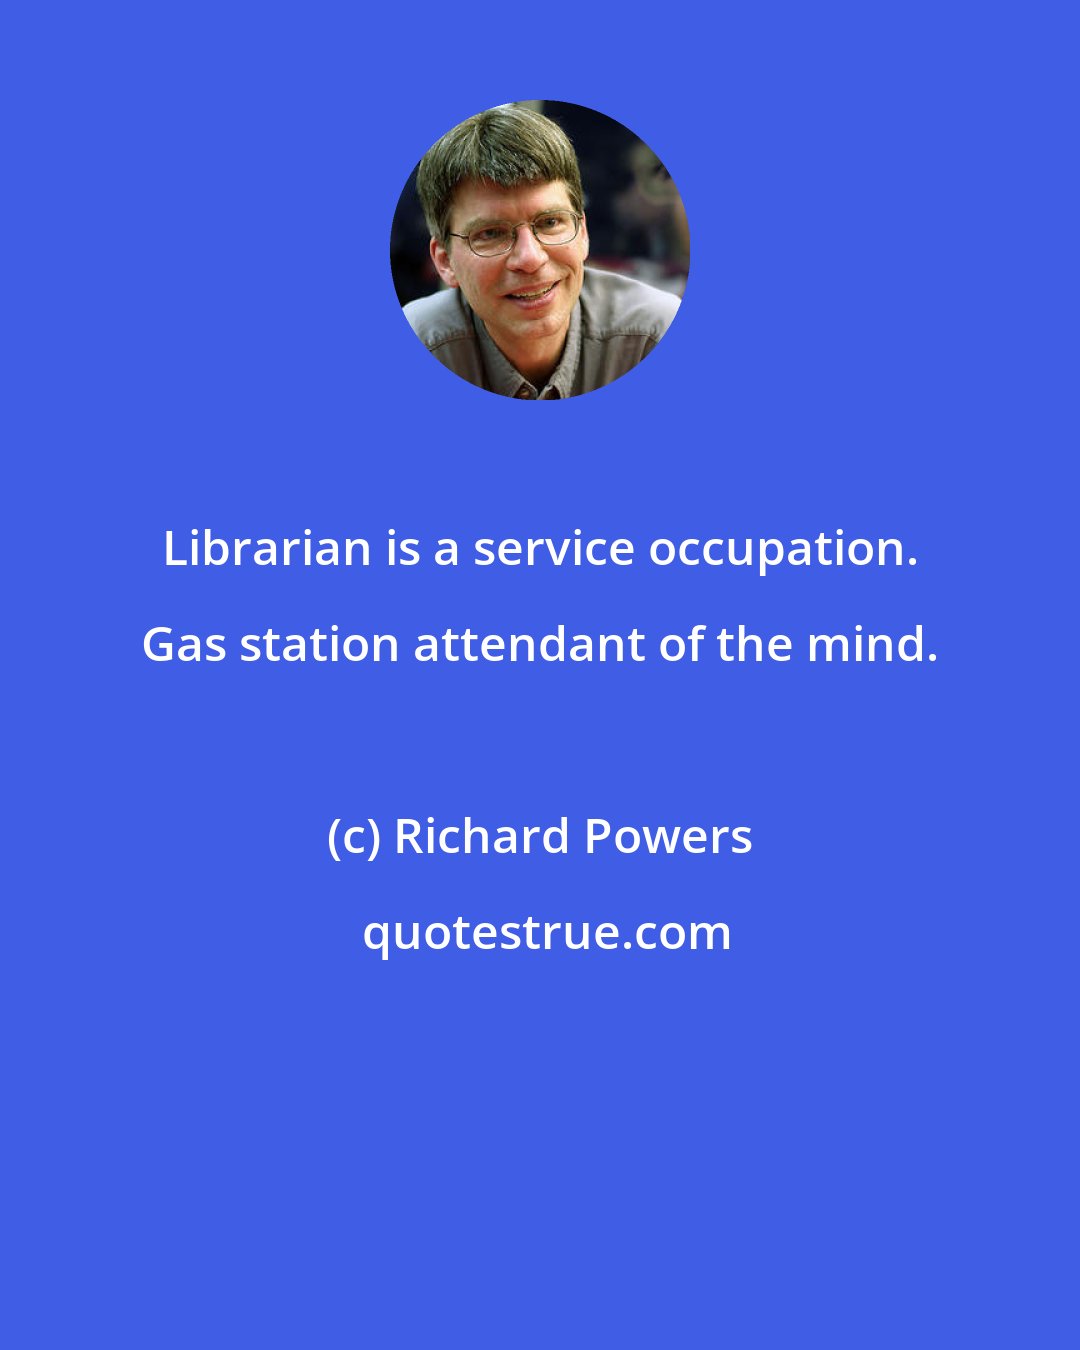 Richard Powers: Librarian is a service occupation. Gas station attendant of the mind.